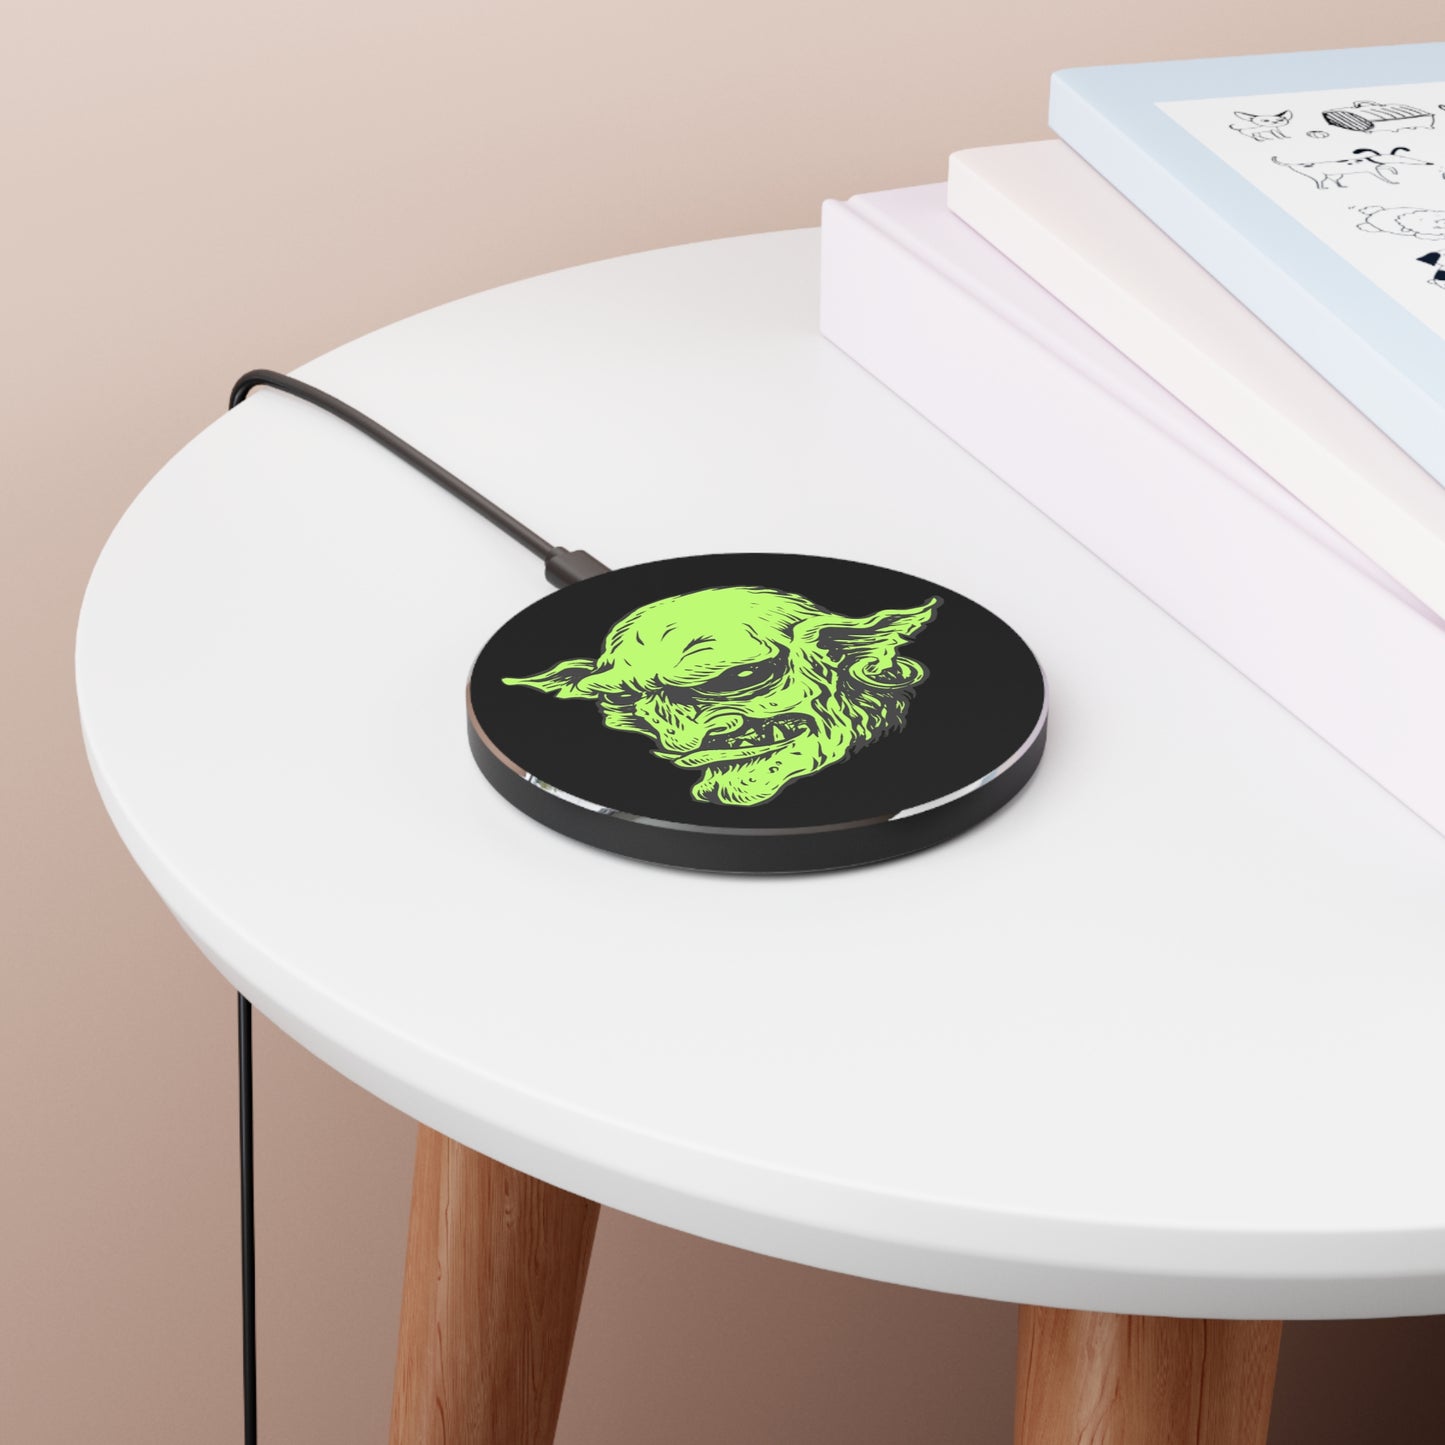 Wireless Charger - Goblin Charger Includes Micro USB Cable